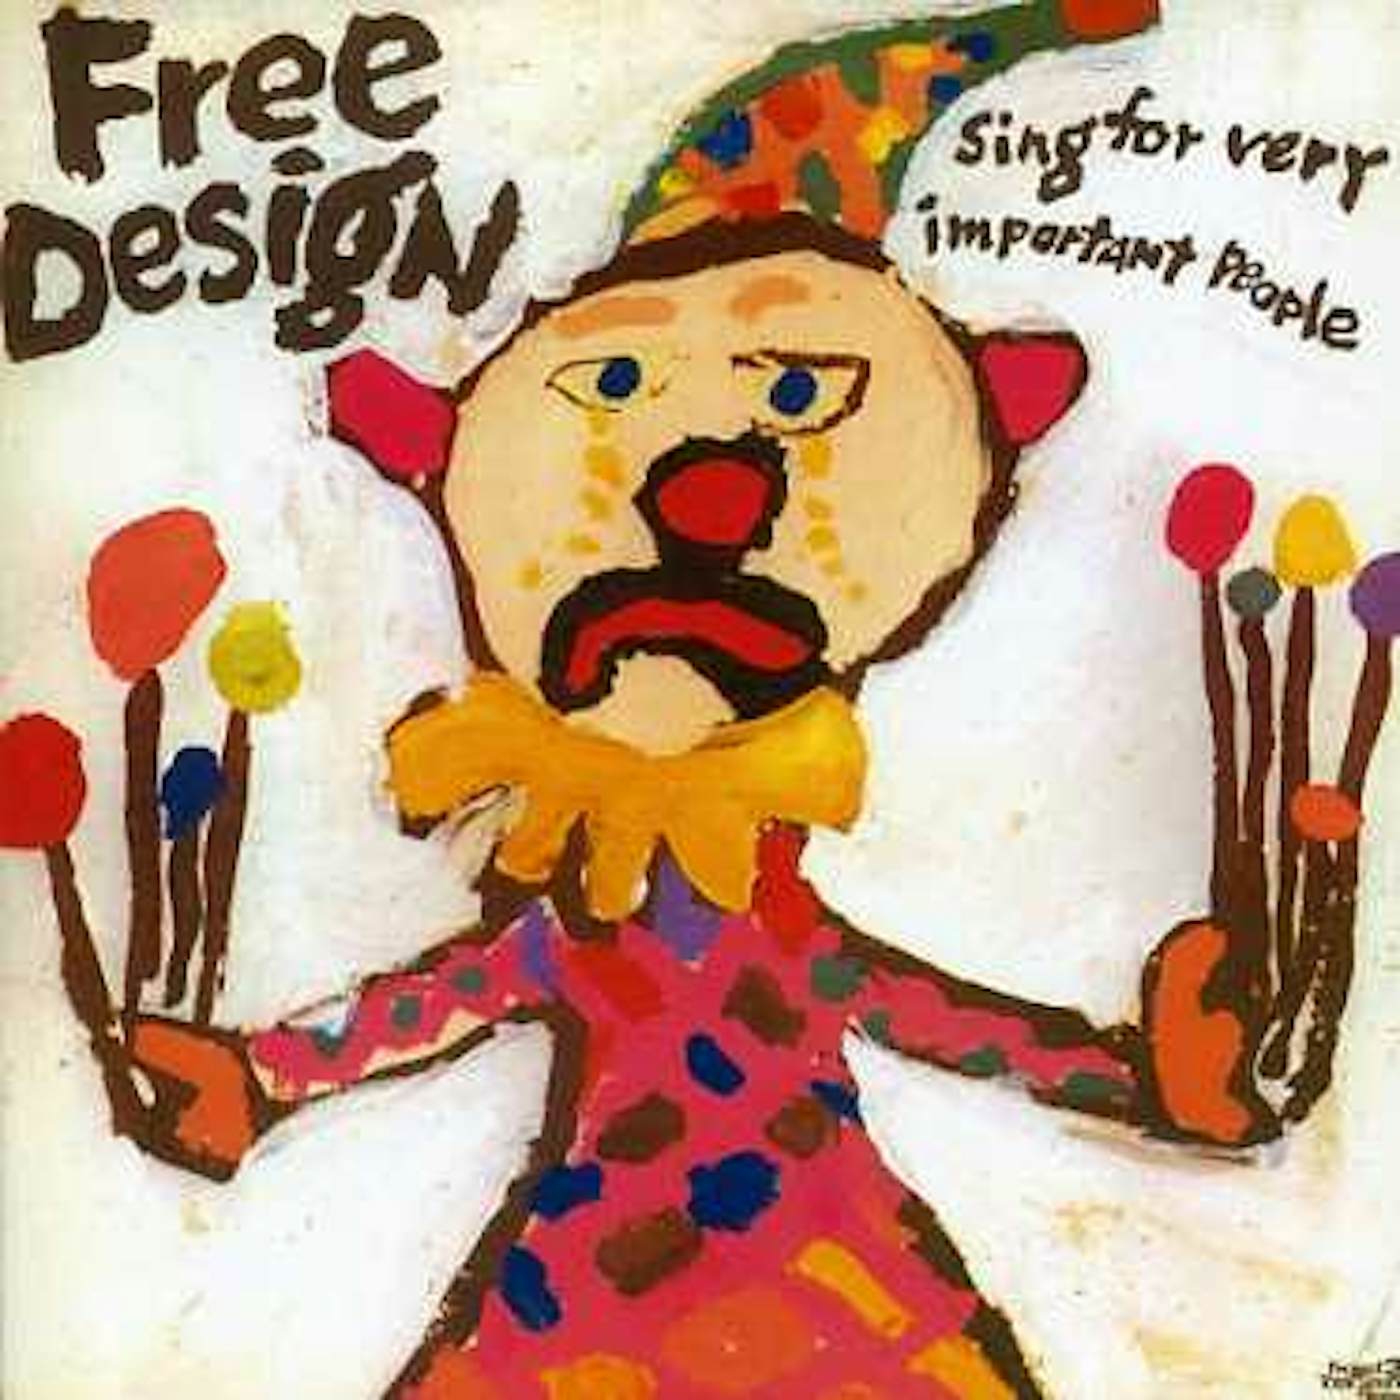 The Free Design SING FOR VERY IMPORTANT PEOPLE CD